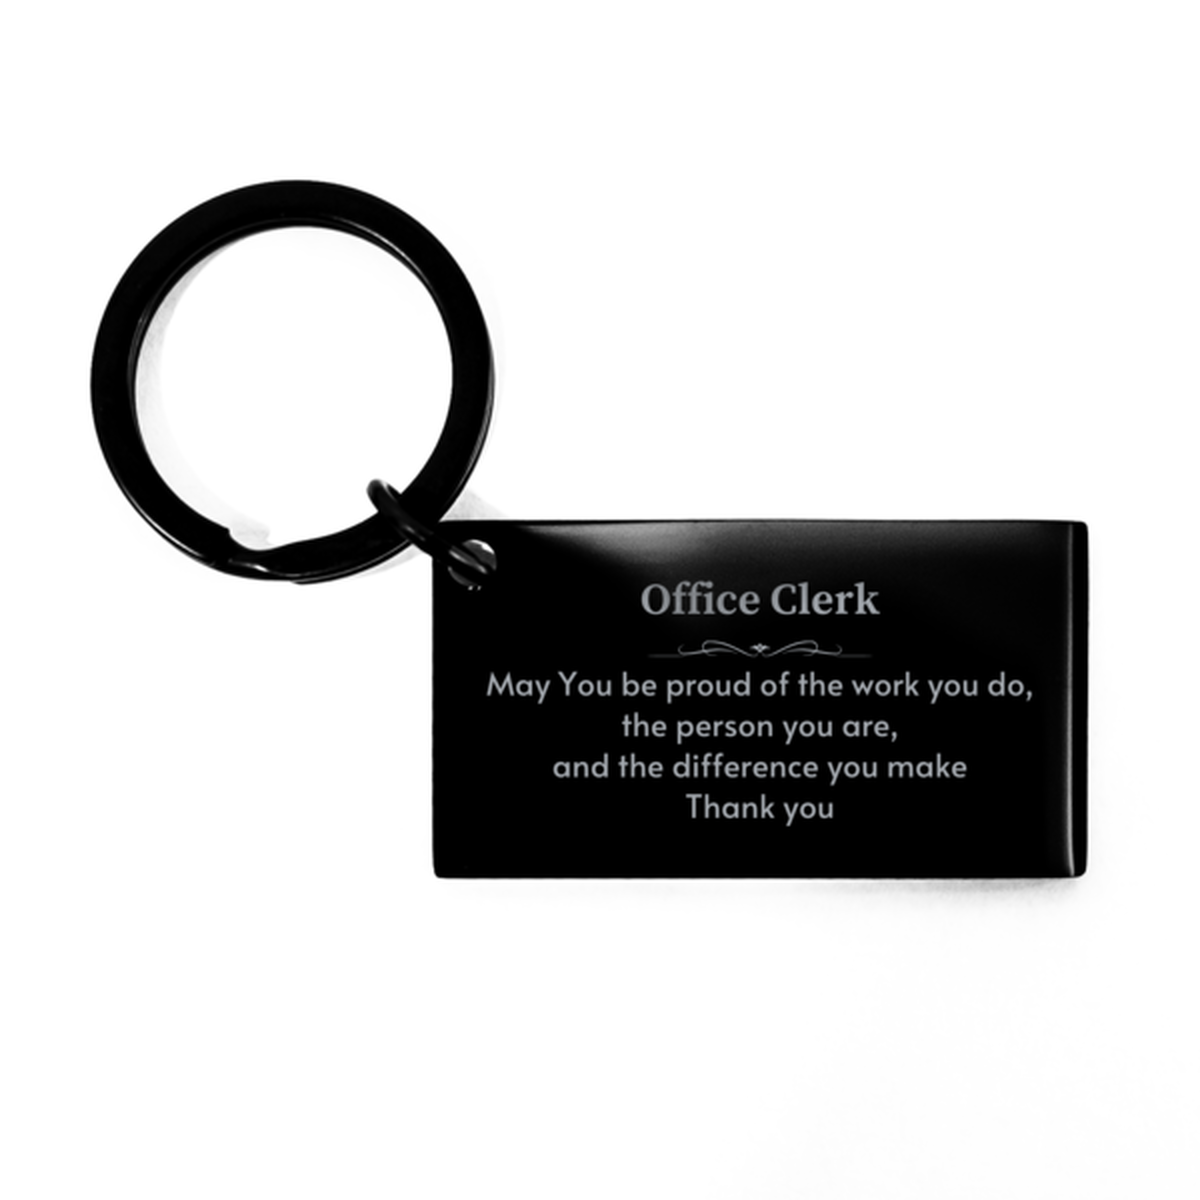 Heartwarming Keychain Retirement Coworkers Gifts for Office Clerk, Physician May You be proud of the work you do, the person you are Gifts for Boss Men Women Friends